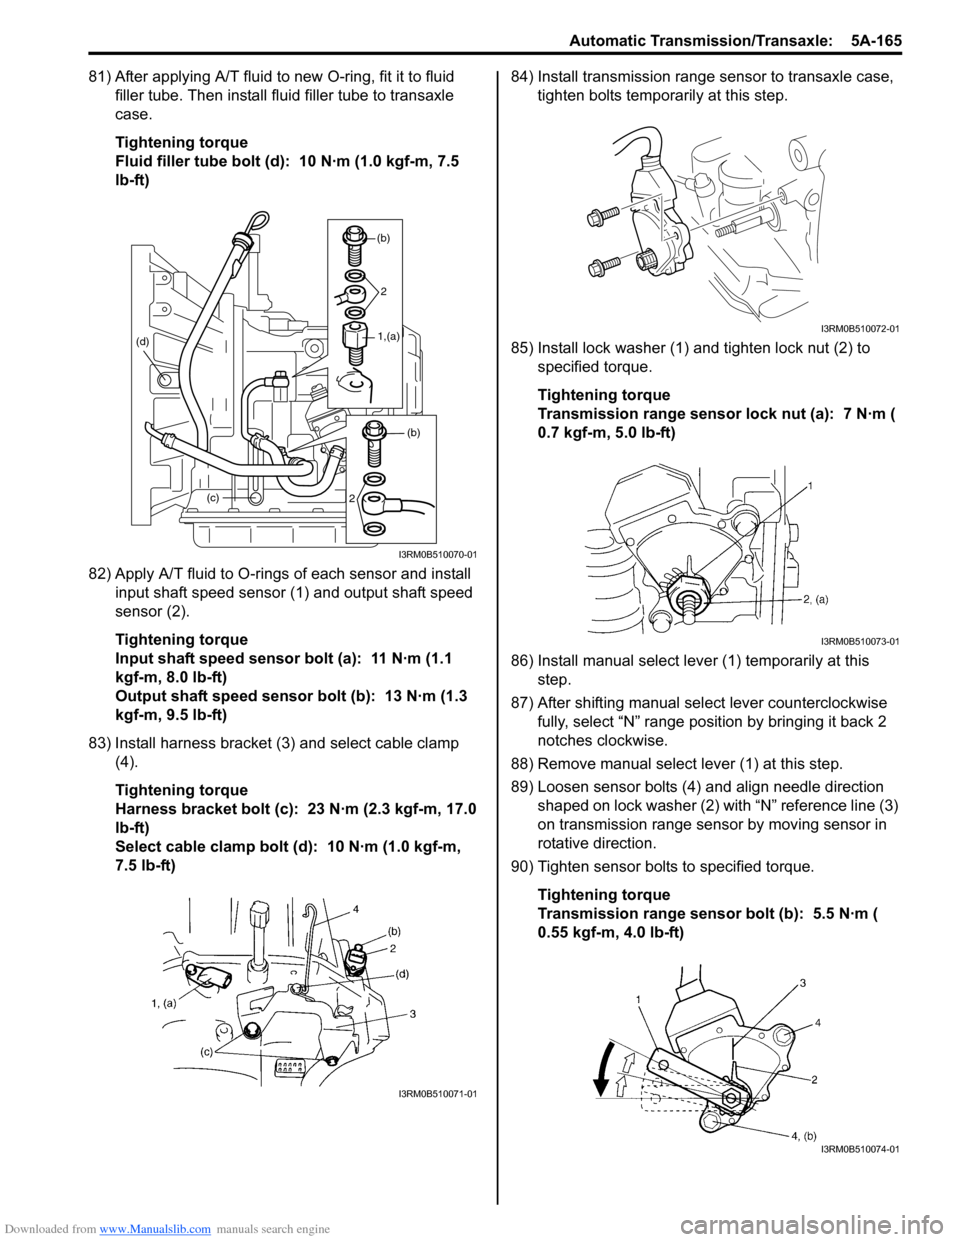 SUZUKI SWIFT 2007 2.G Service Service Manual Downloaded from www.Manualslib.com manuals search engine Automatic Transmission/Transaxle:  5A-165
81) After applying A/T fluid to new O-ring, fit it to fluid filler tube. Then install fl uid filler t